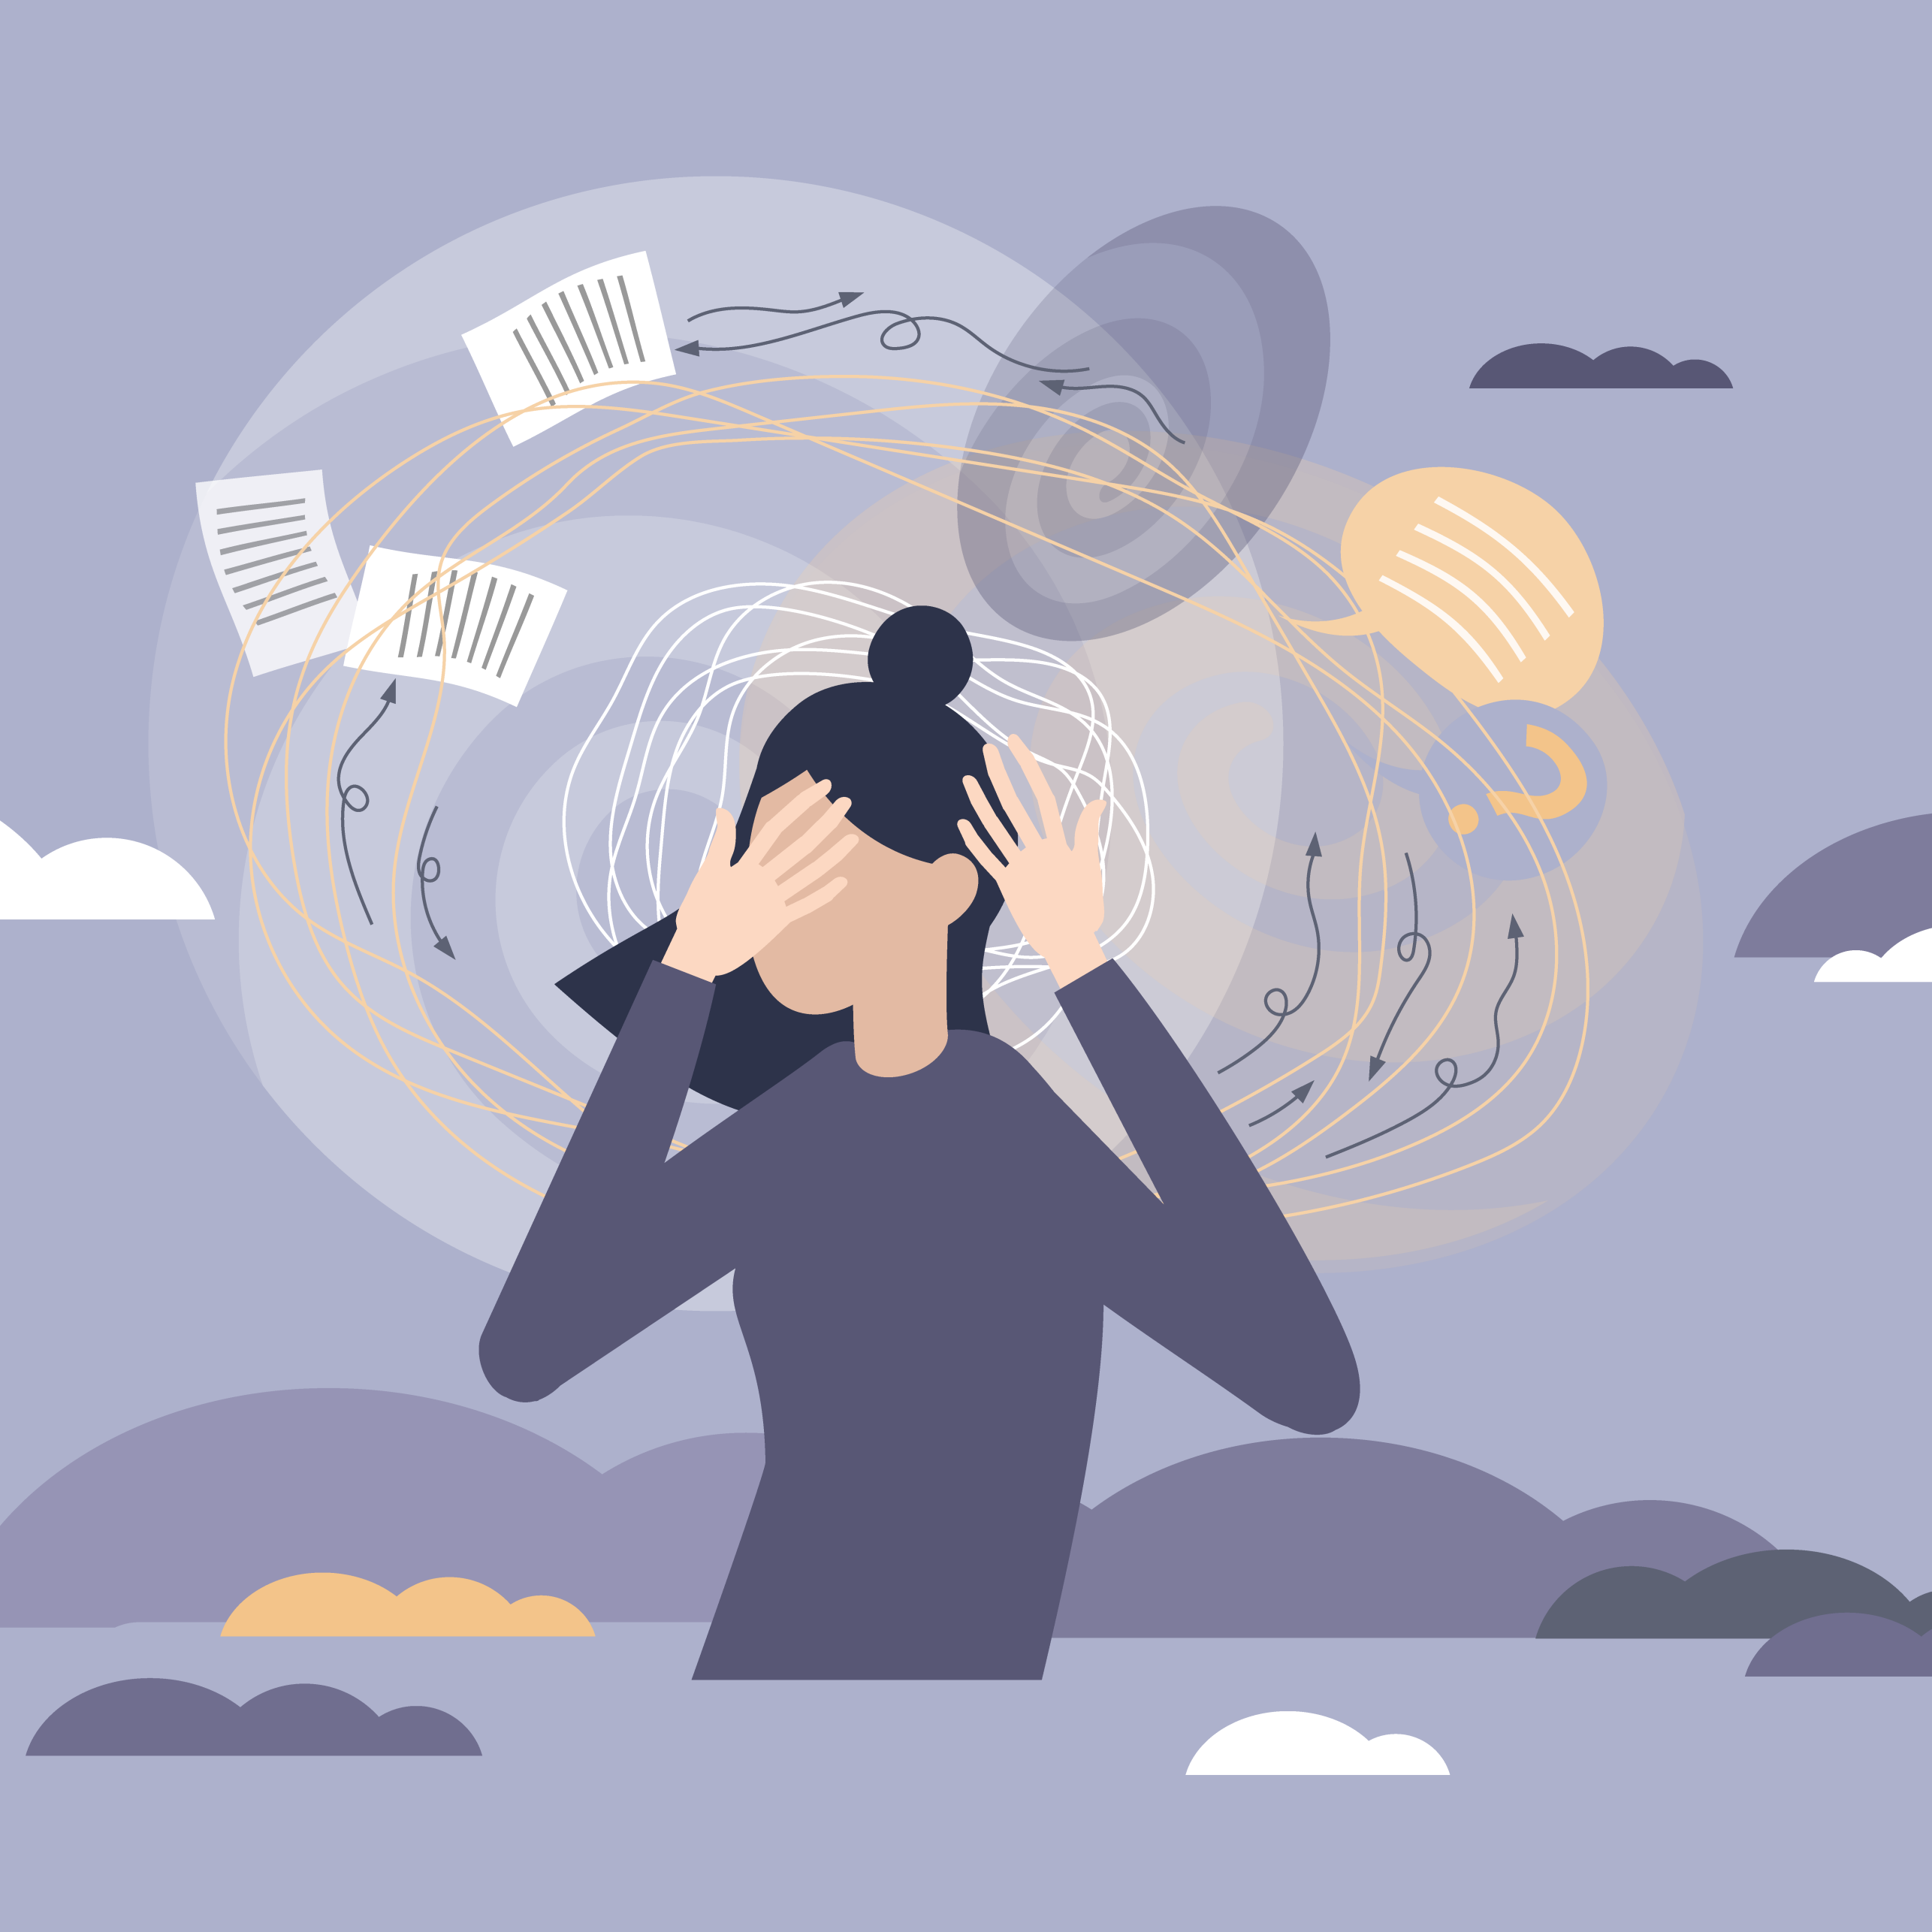 Enlarged view: Illustration of a woman surrounded by a vortex of thoughts.